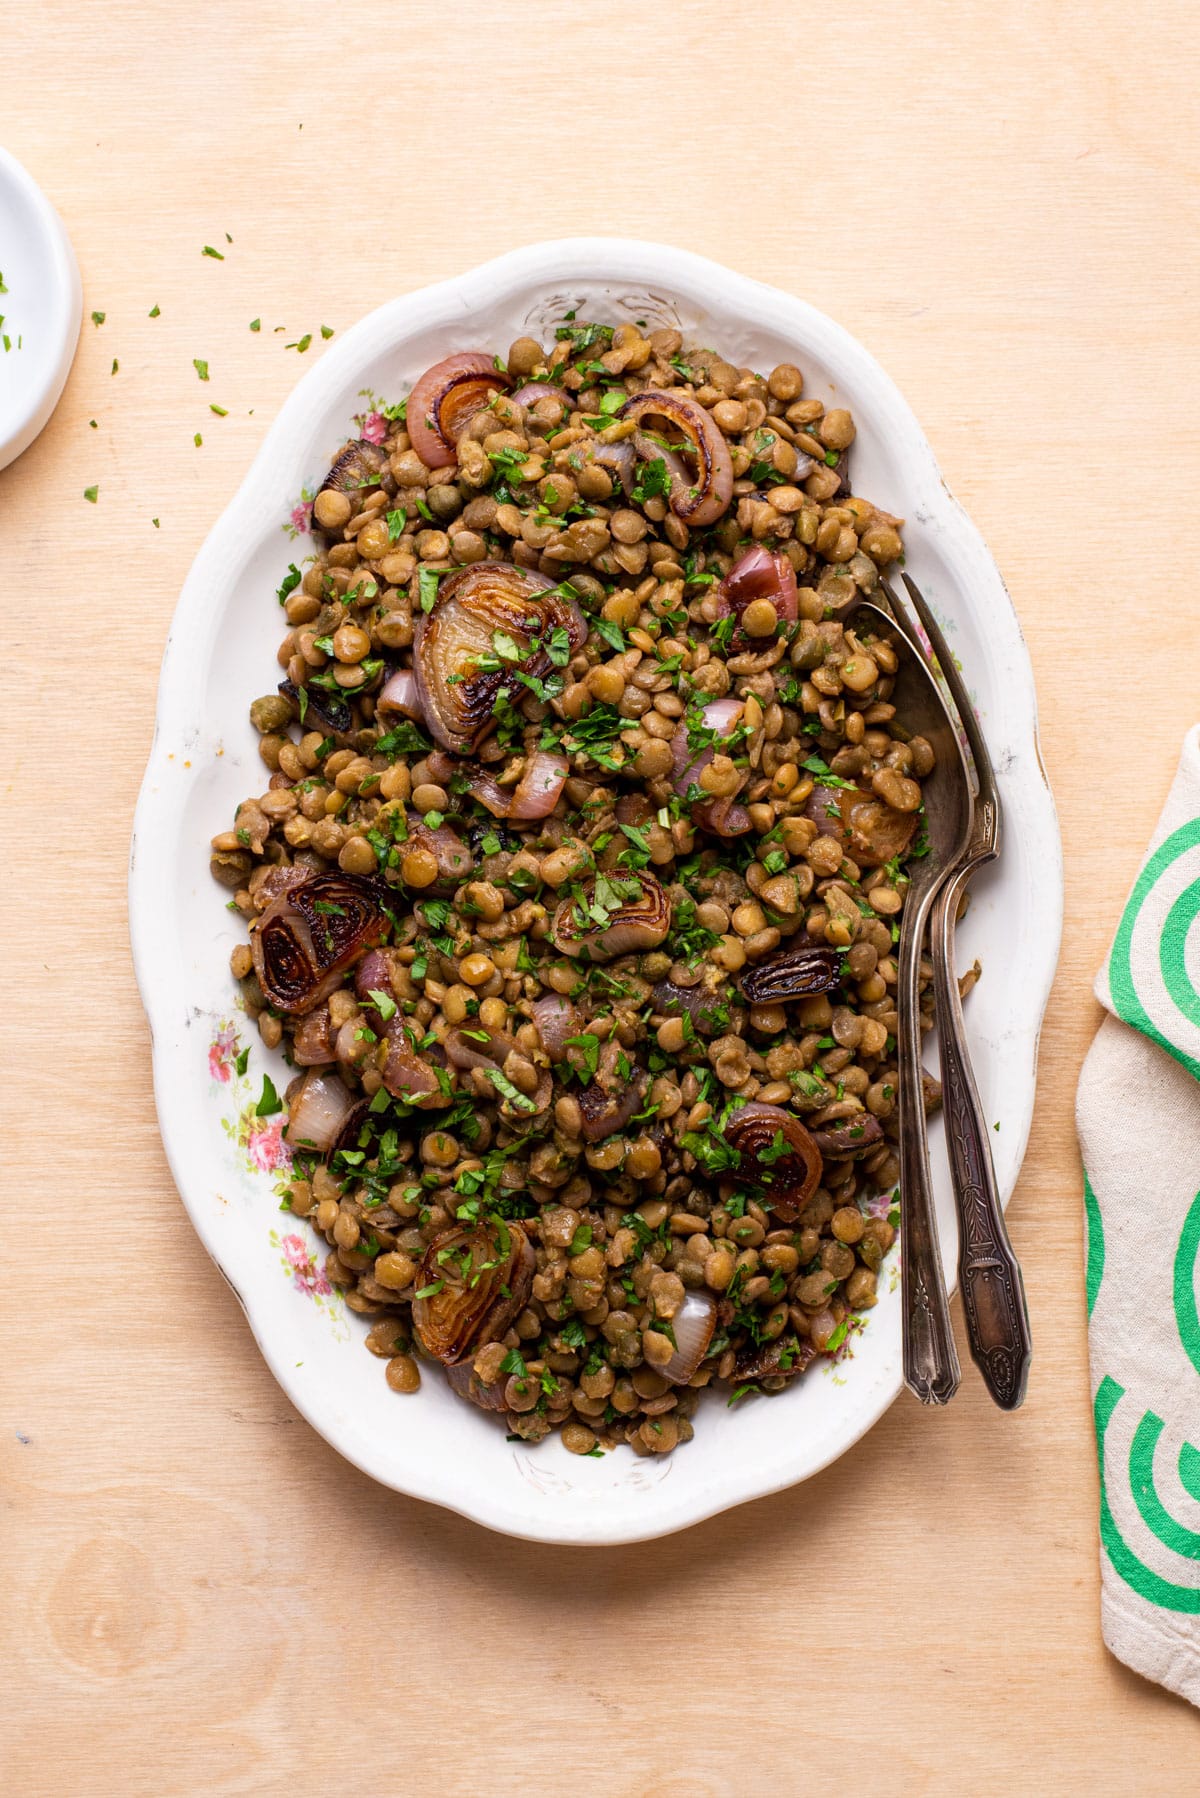 Warm lentil salad with balsamic shallots on a vintage oval platter on a wooden table.